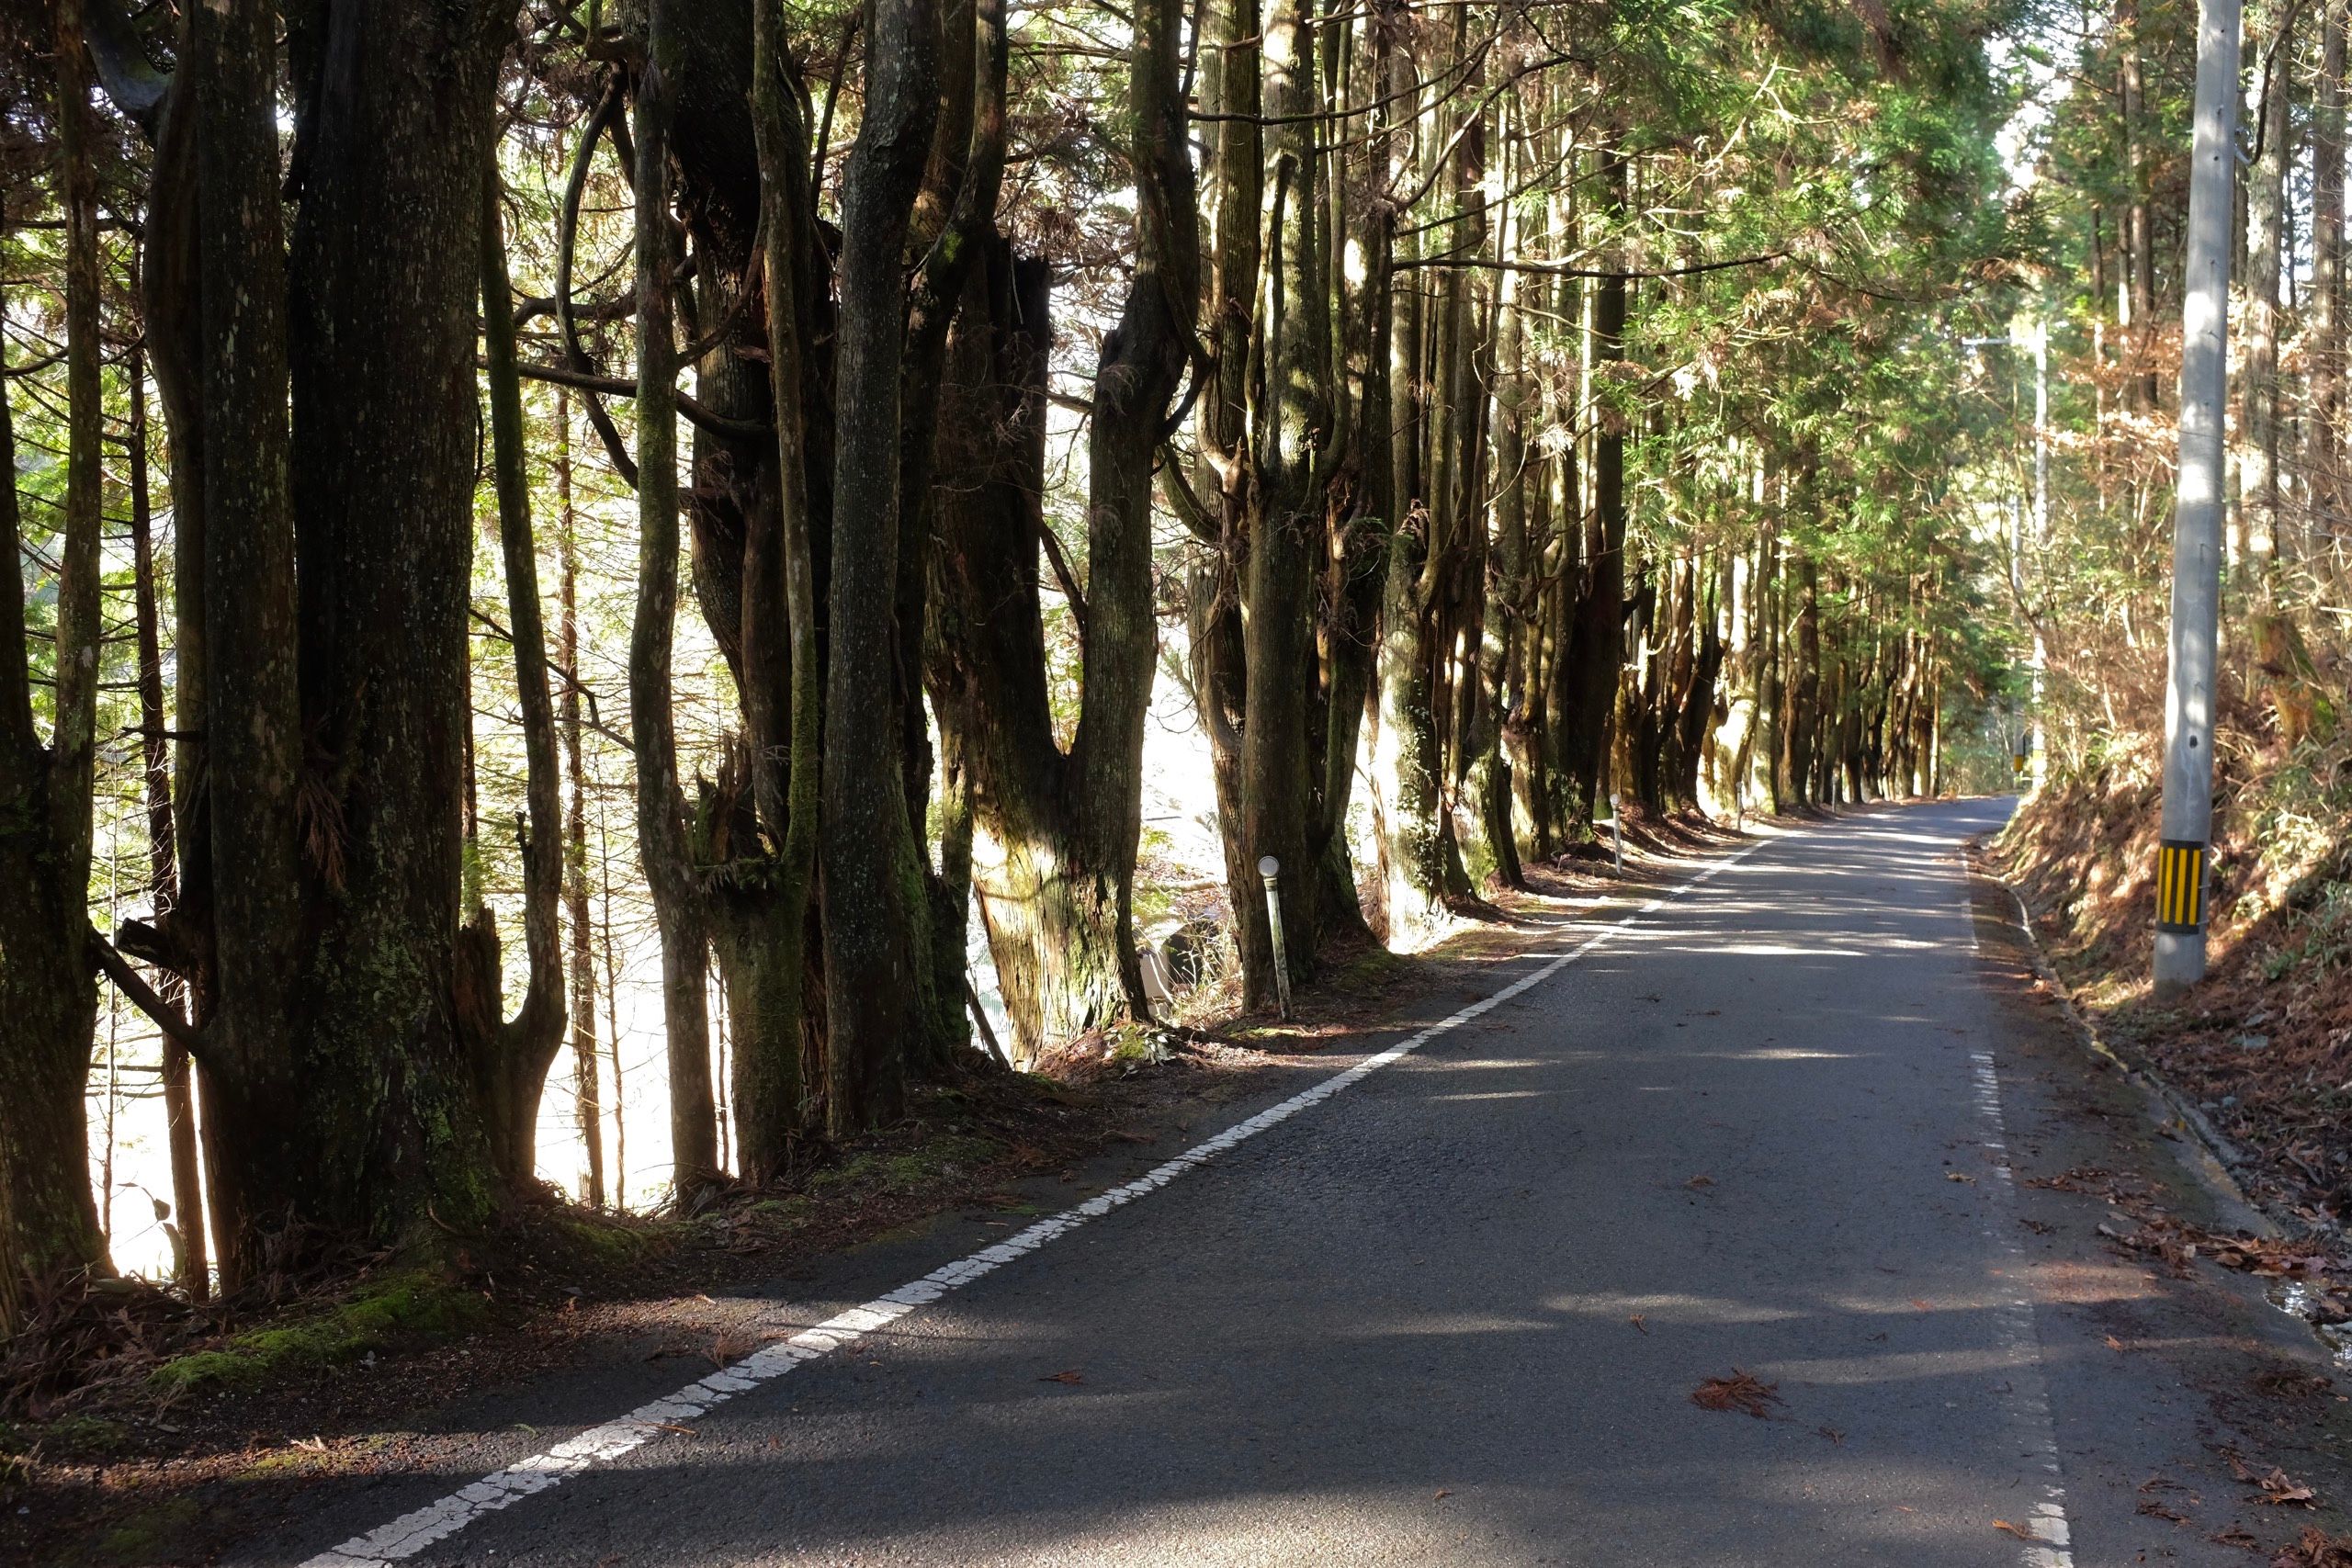 A row of Japanese cypress trees line a sunny country road.